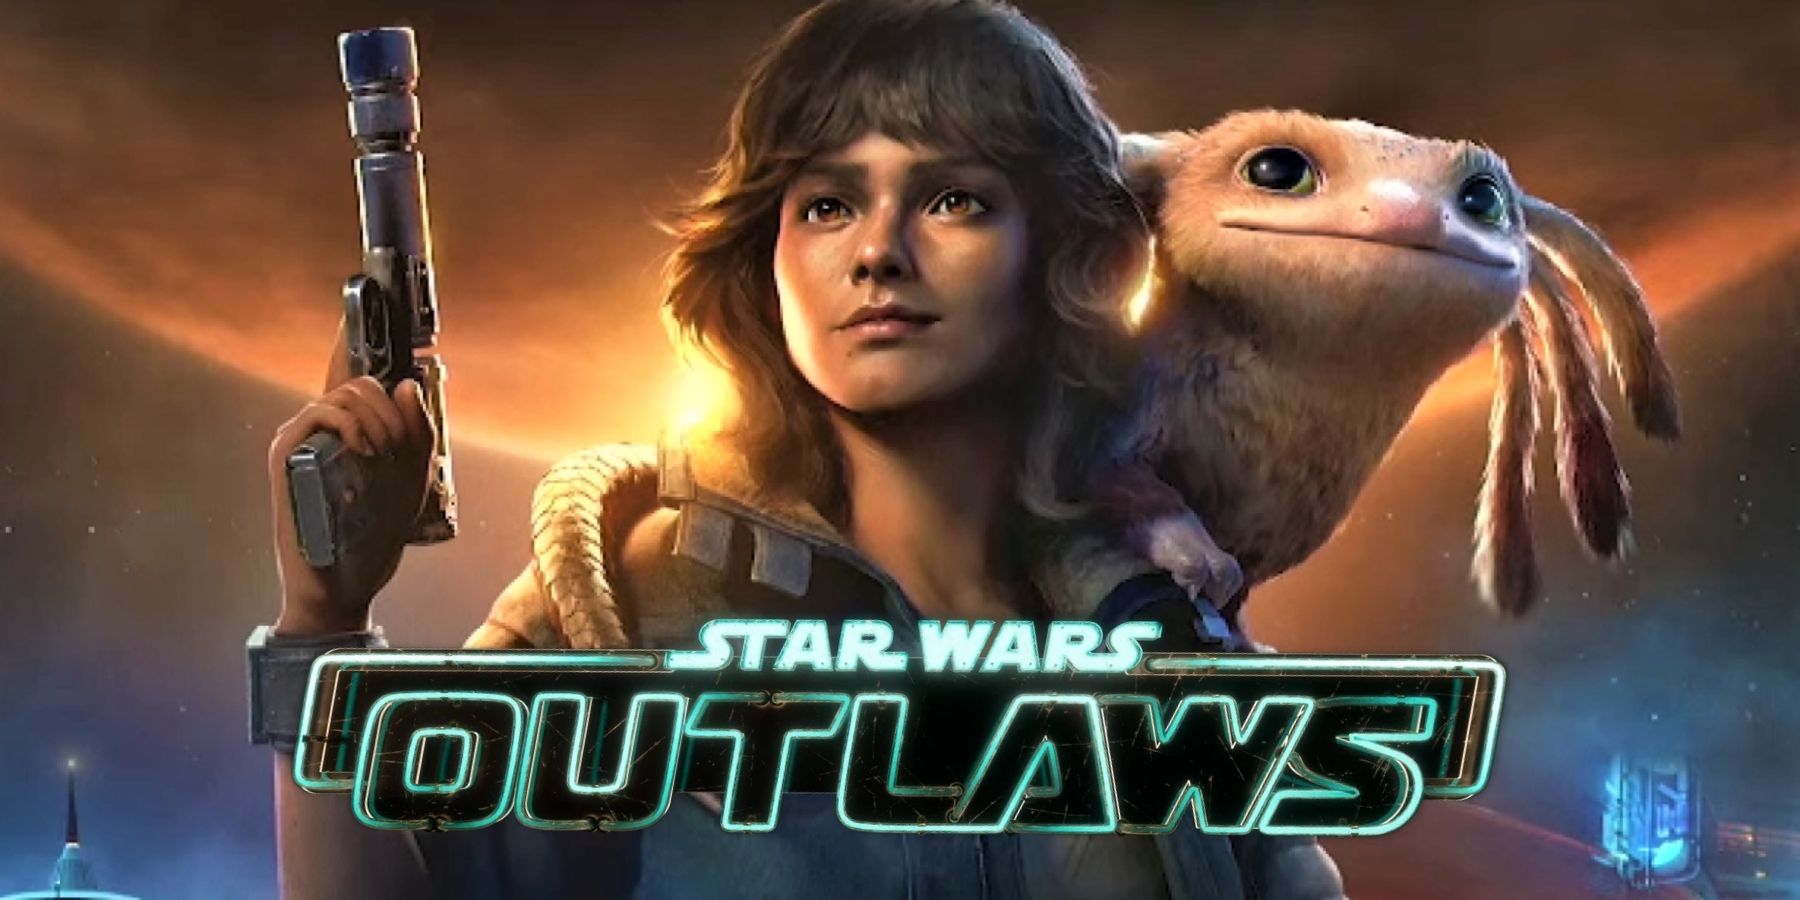 Star Wars Outlaws' Gameplay Reveal was a Double-Bladed Lightsaber